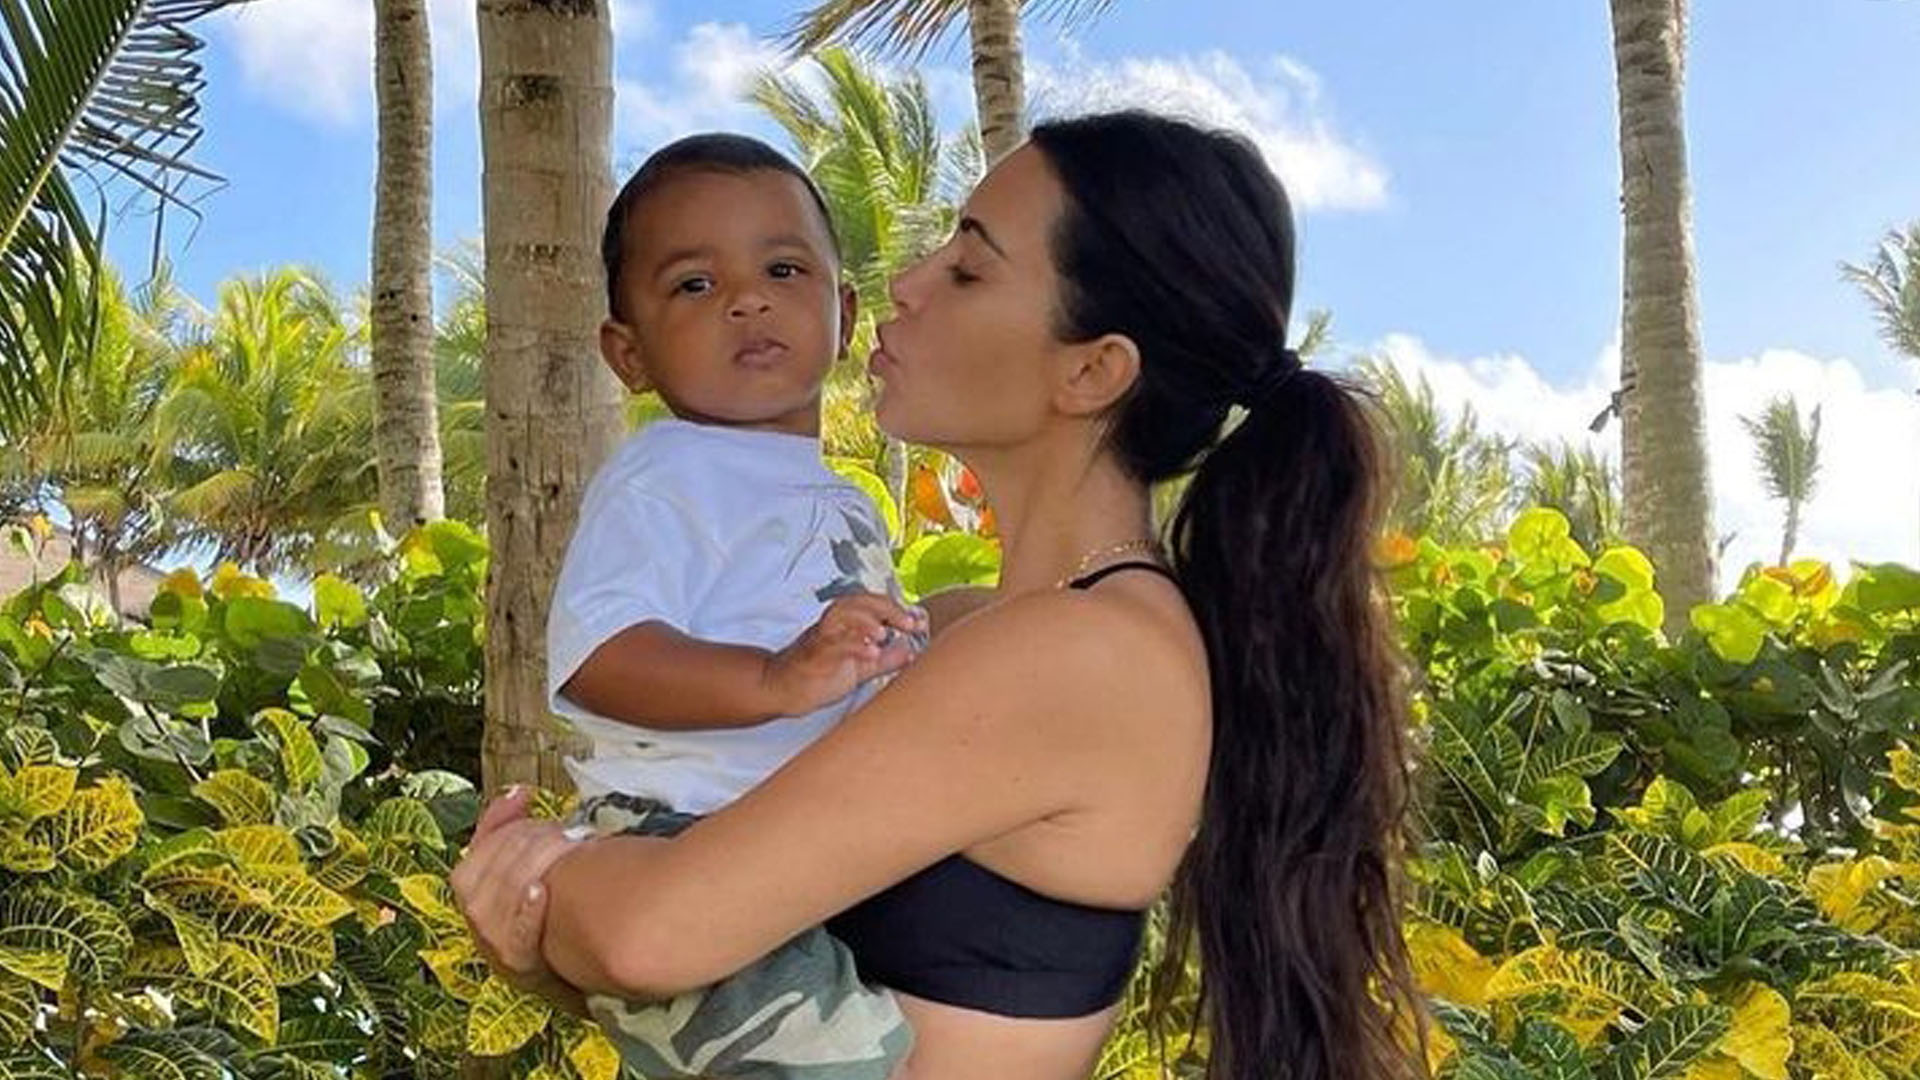 Shocking: Kim Kardashian’s Son Psalm West Stuns Fans in Rare Family Video, Looking Grown Up at 4